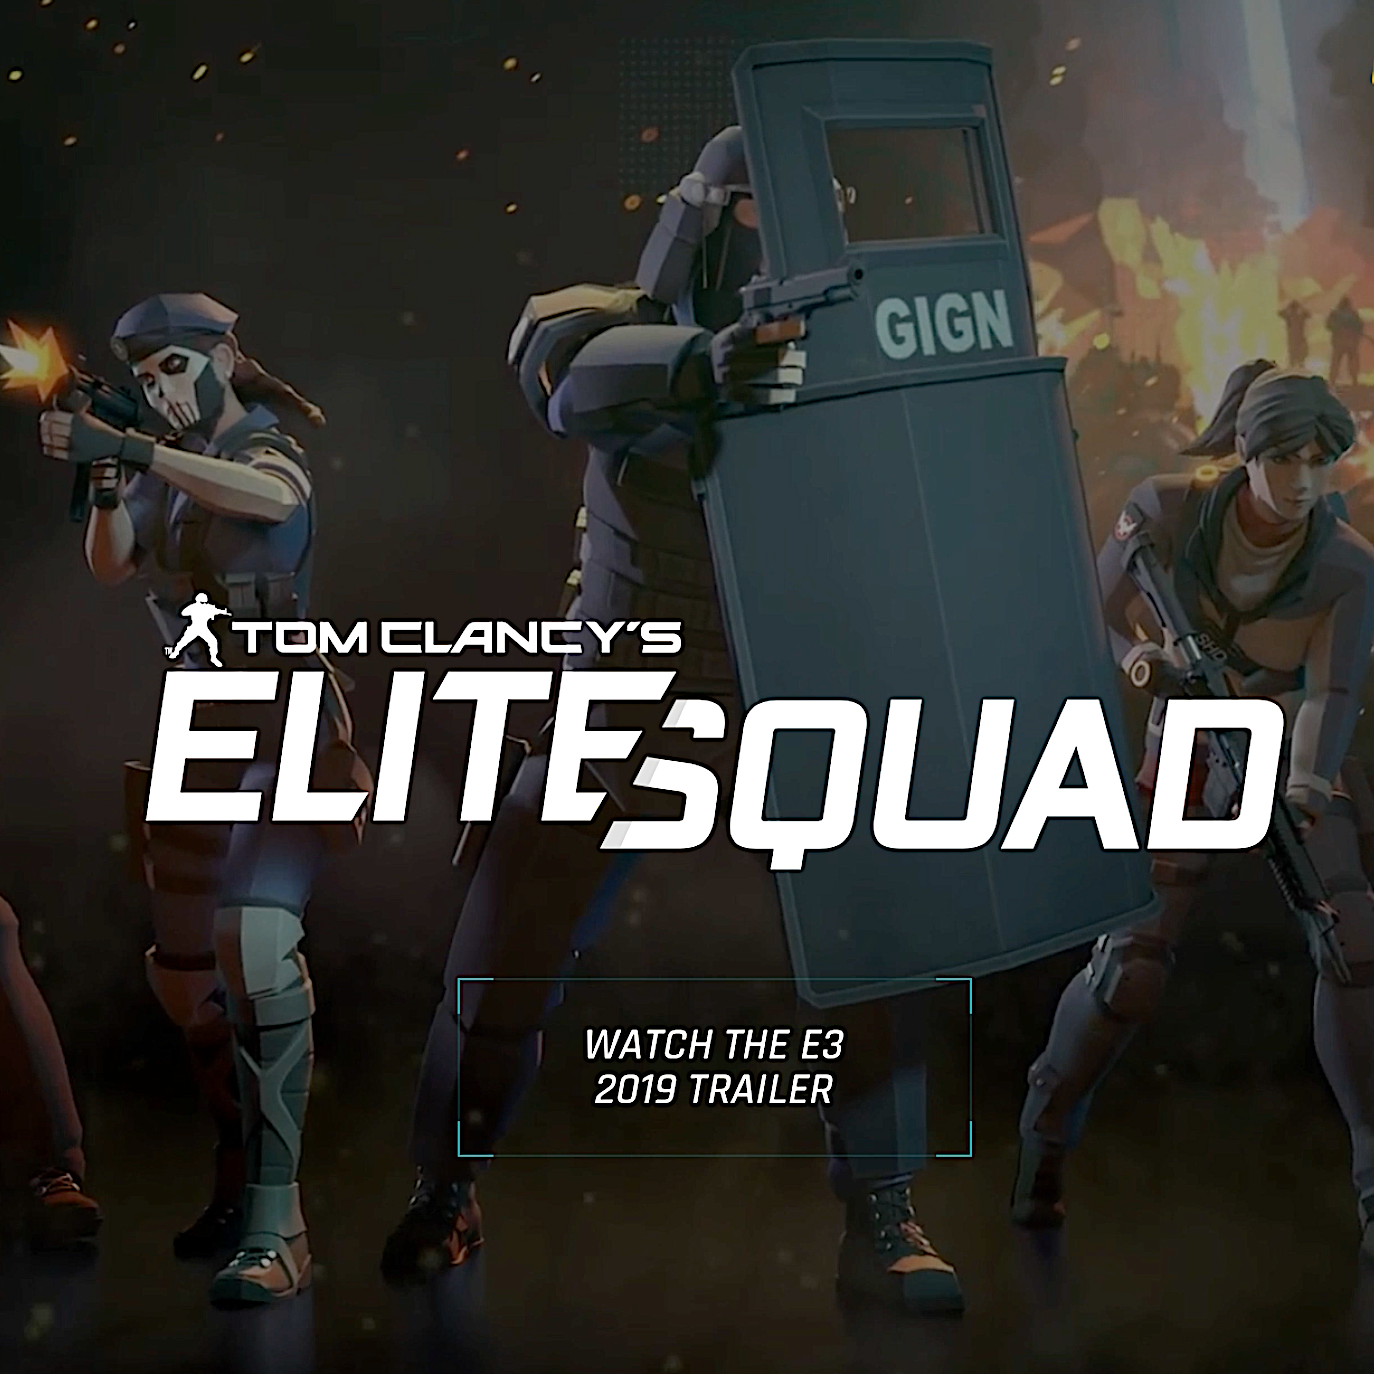 Ubisoft's "Tom Clancy's Elite Squad"- E3 2019 Mobile Game Announcement Trailer with The Hit House composer William August Hunt's trailer music "Master Force"